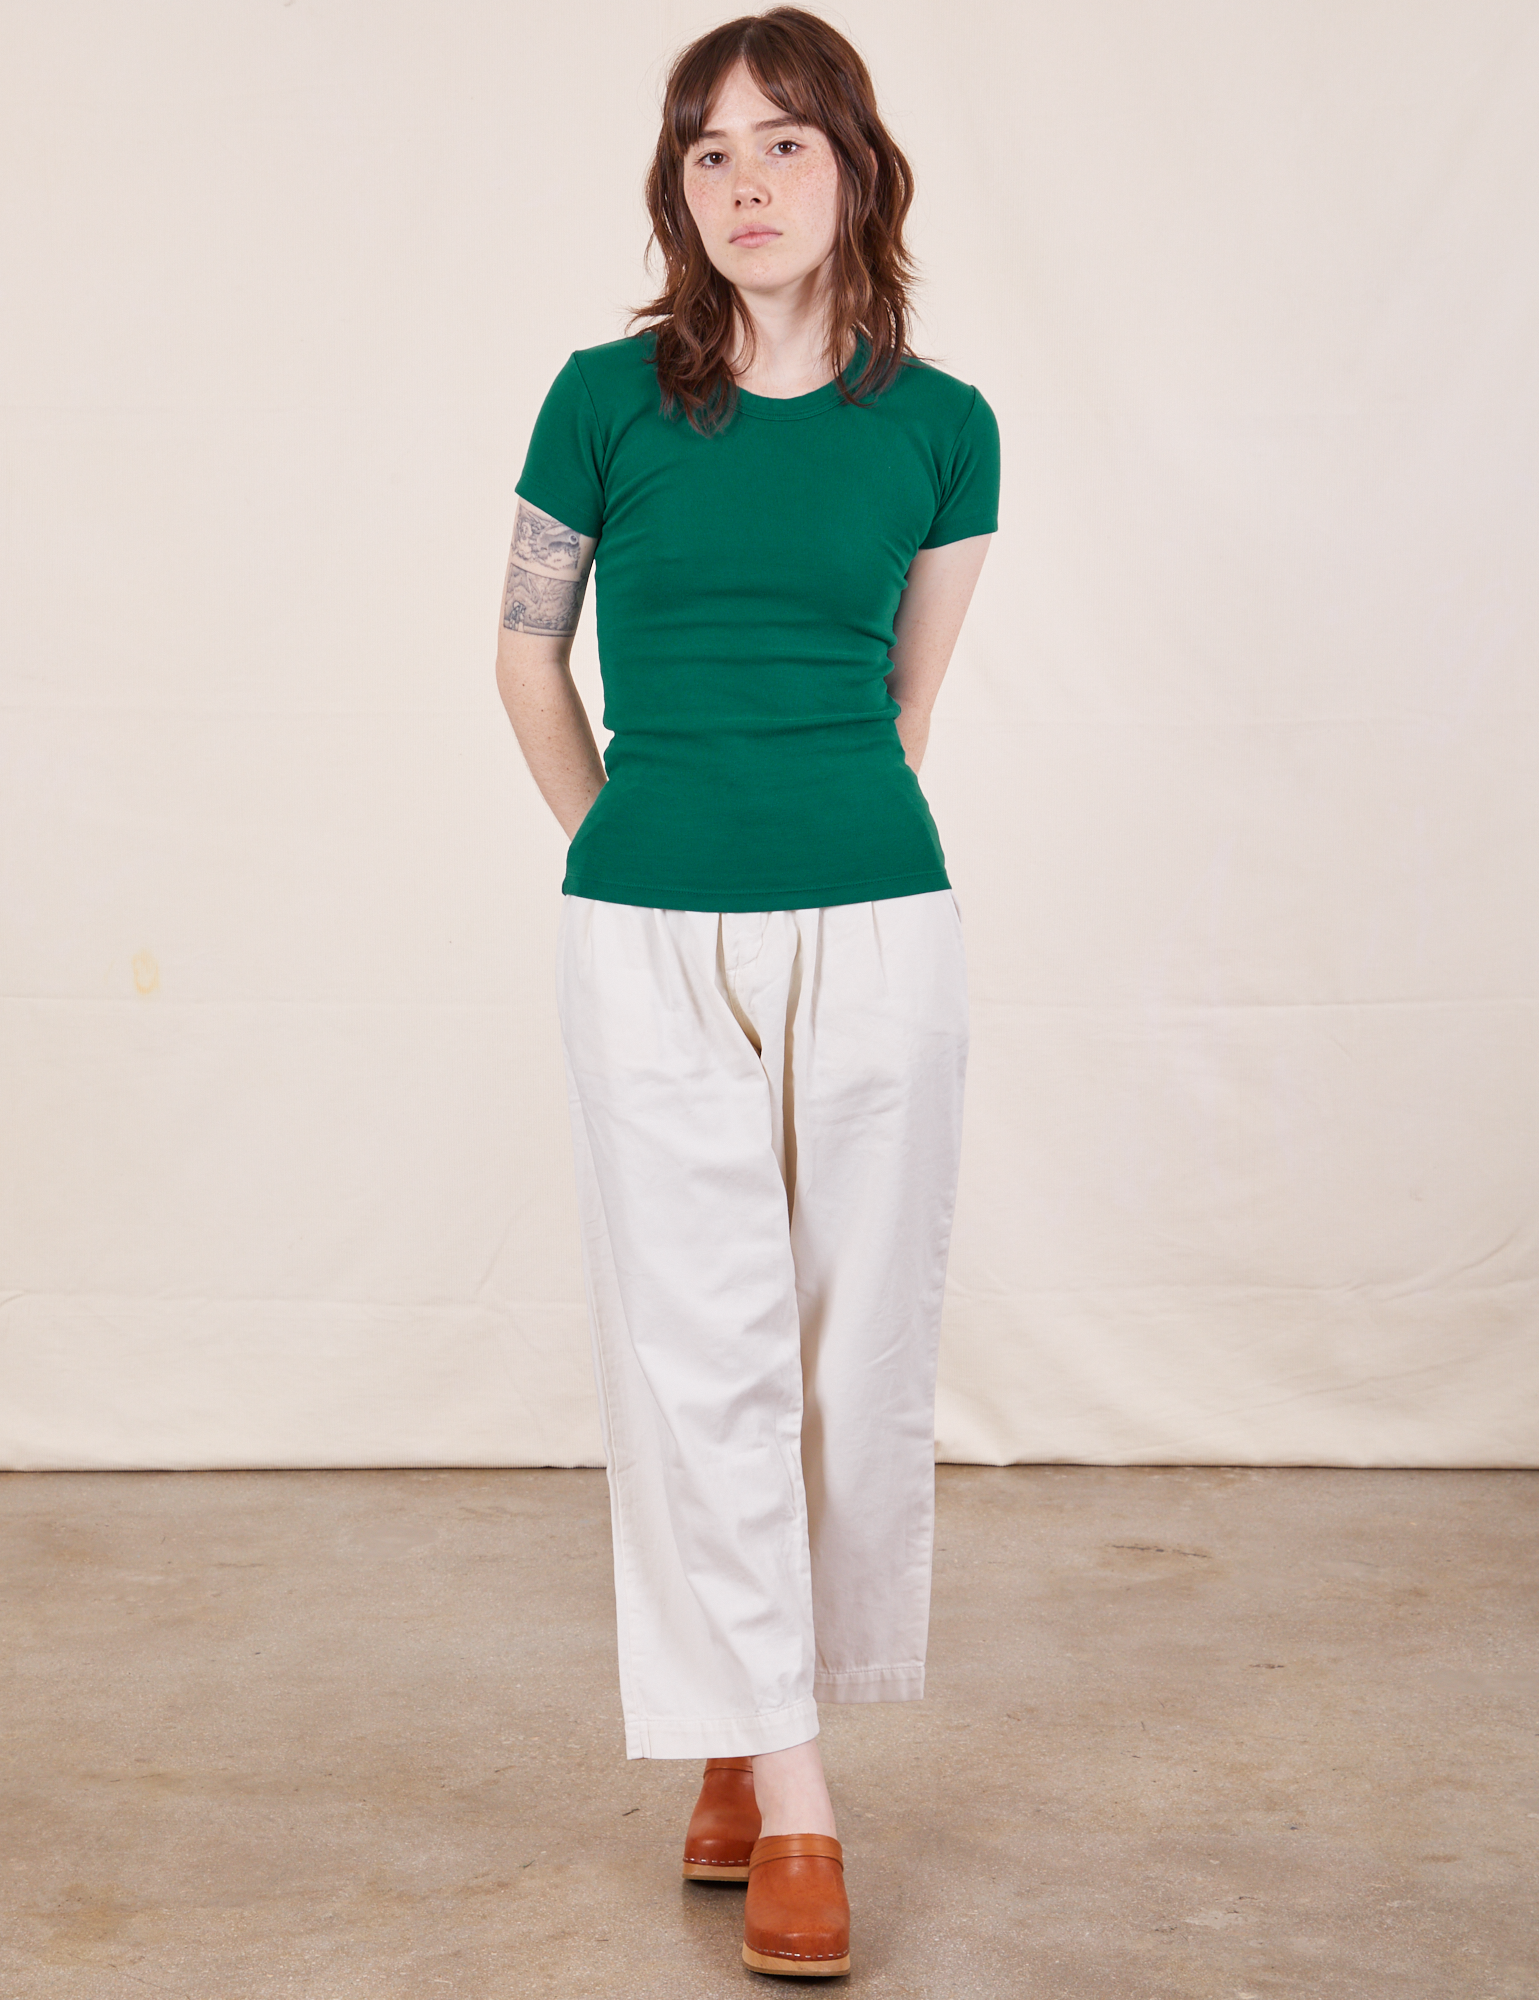 Hana is wearing Baby Tee in Hunter Green and vintage off-white Petite Heavy Weight Trousers